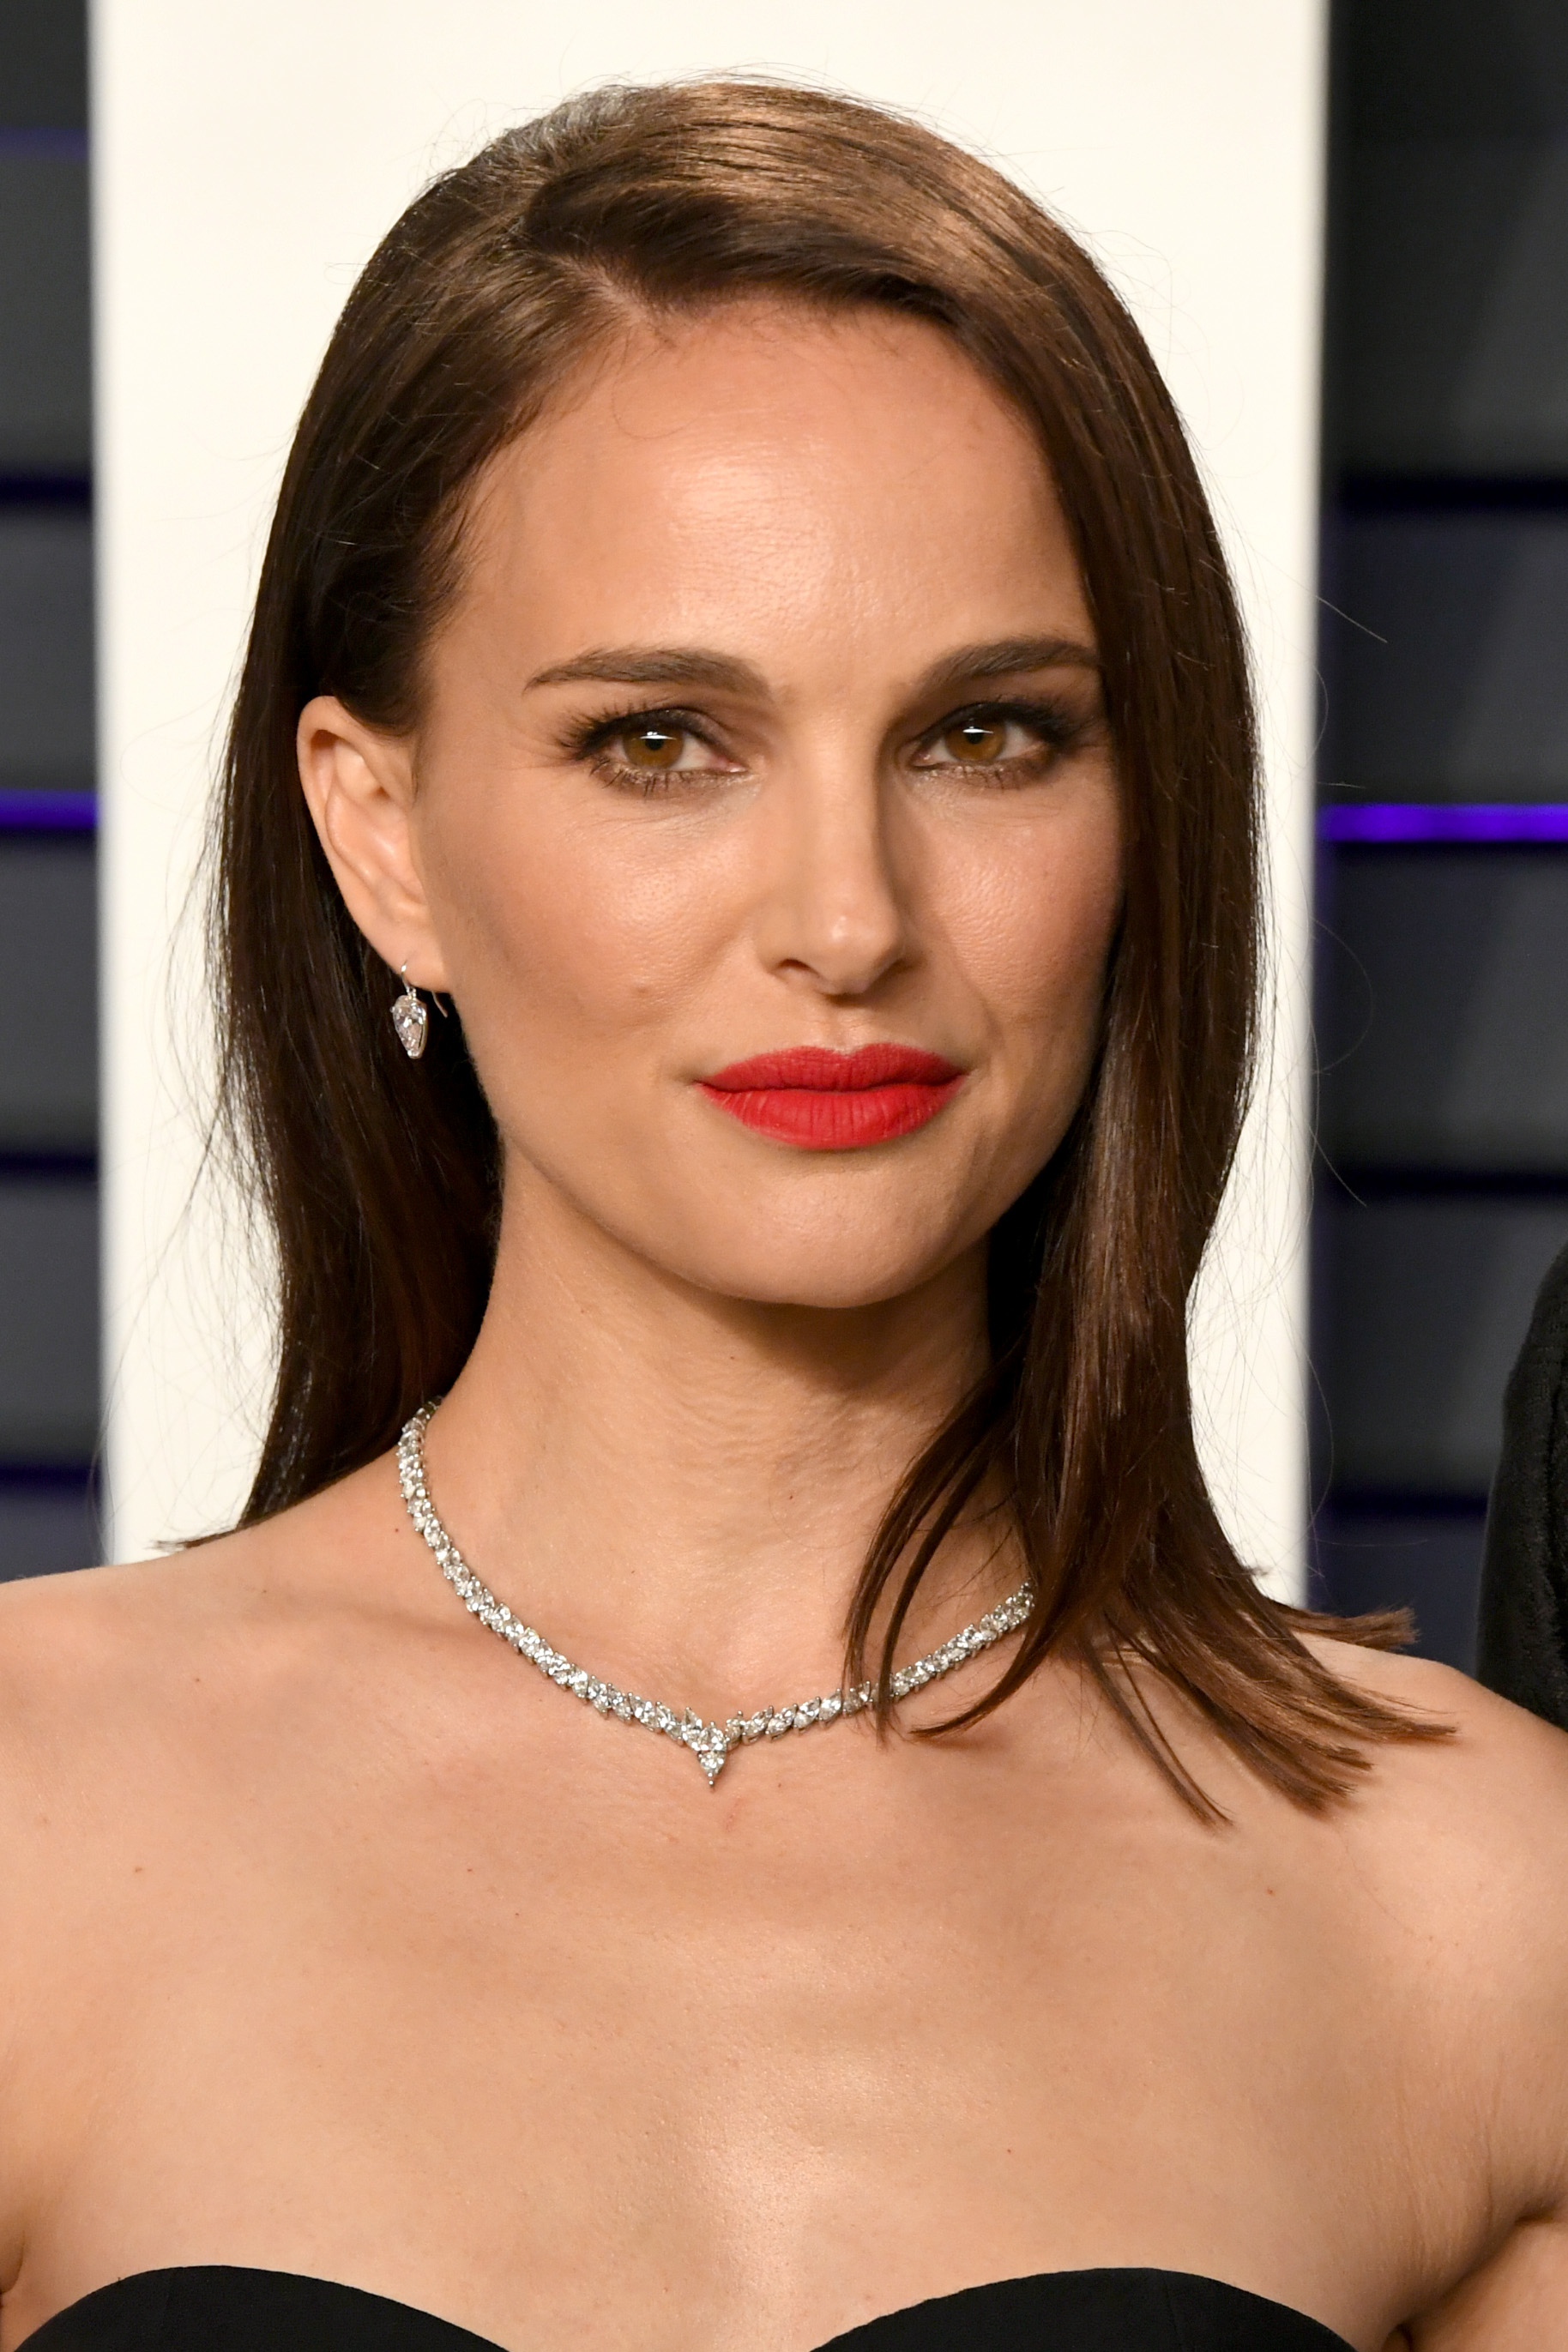 A close-up of Natalie with red lipstick and wearing a diamond necklace